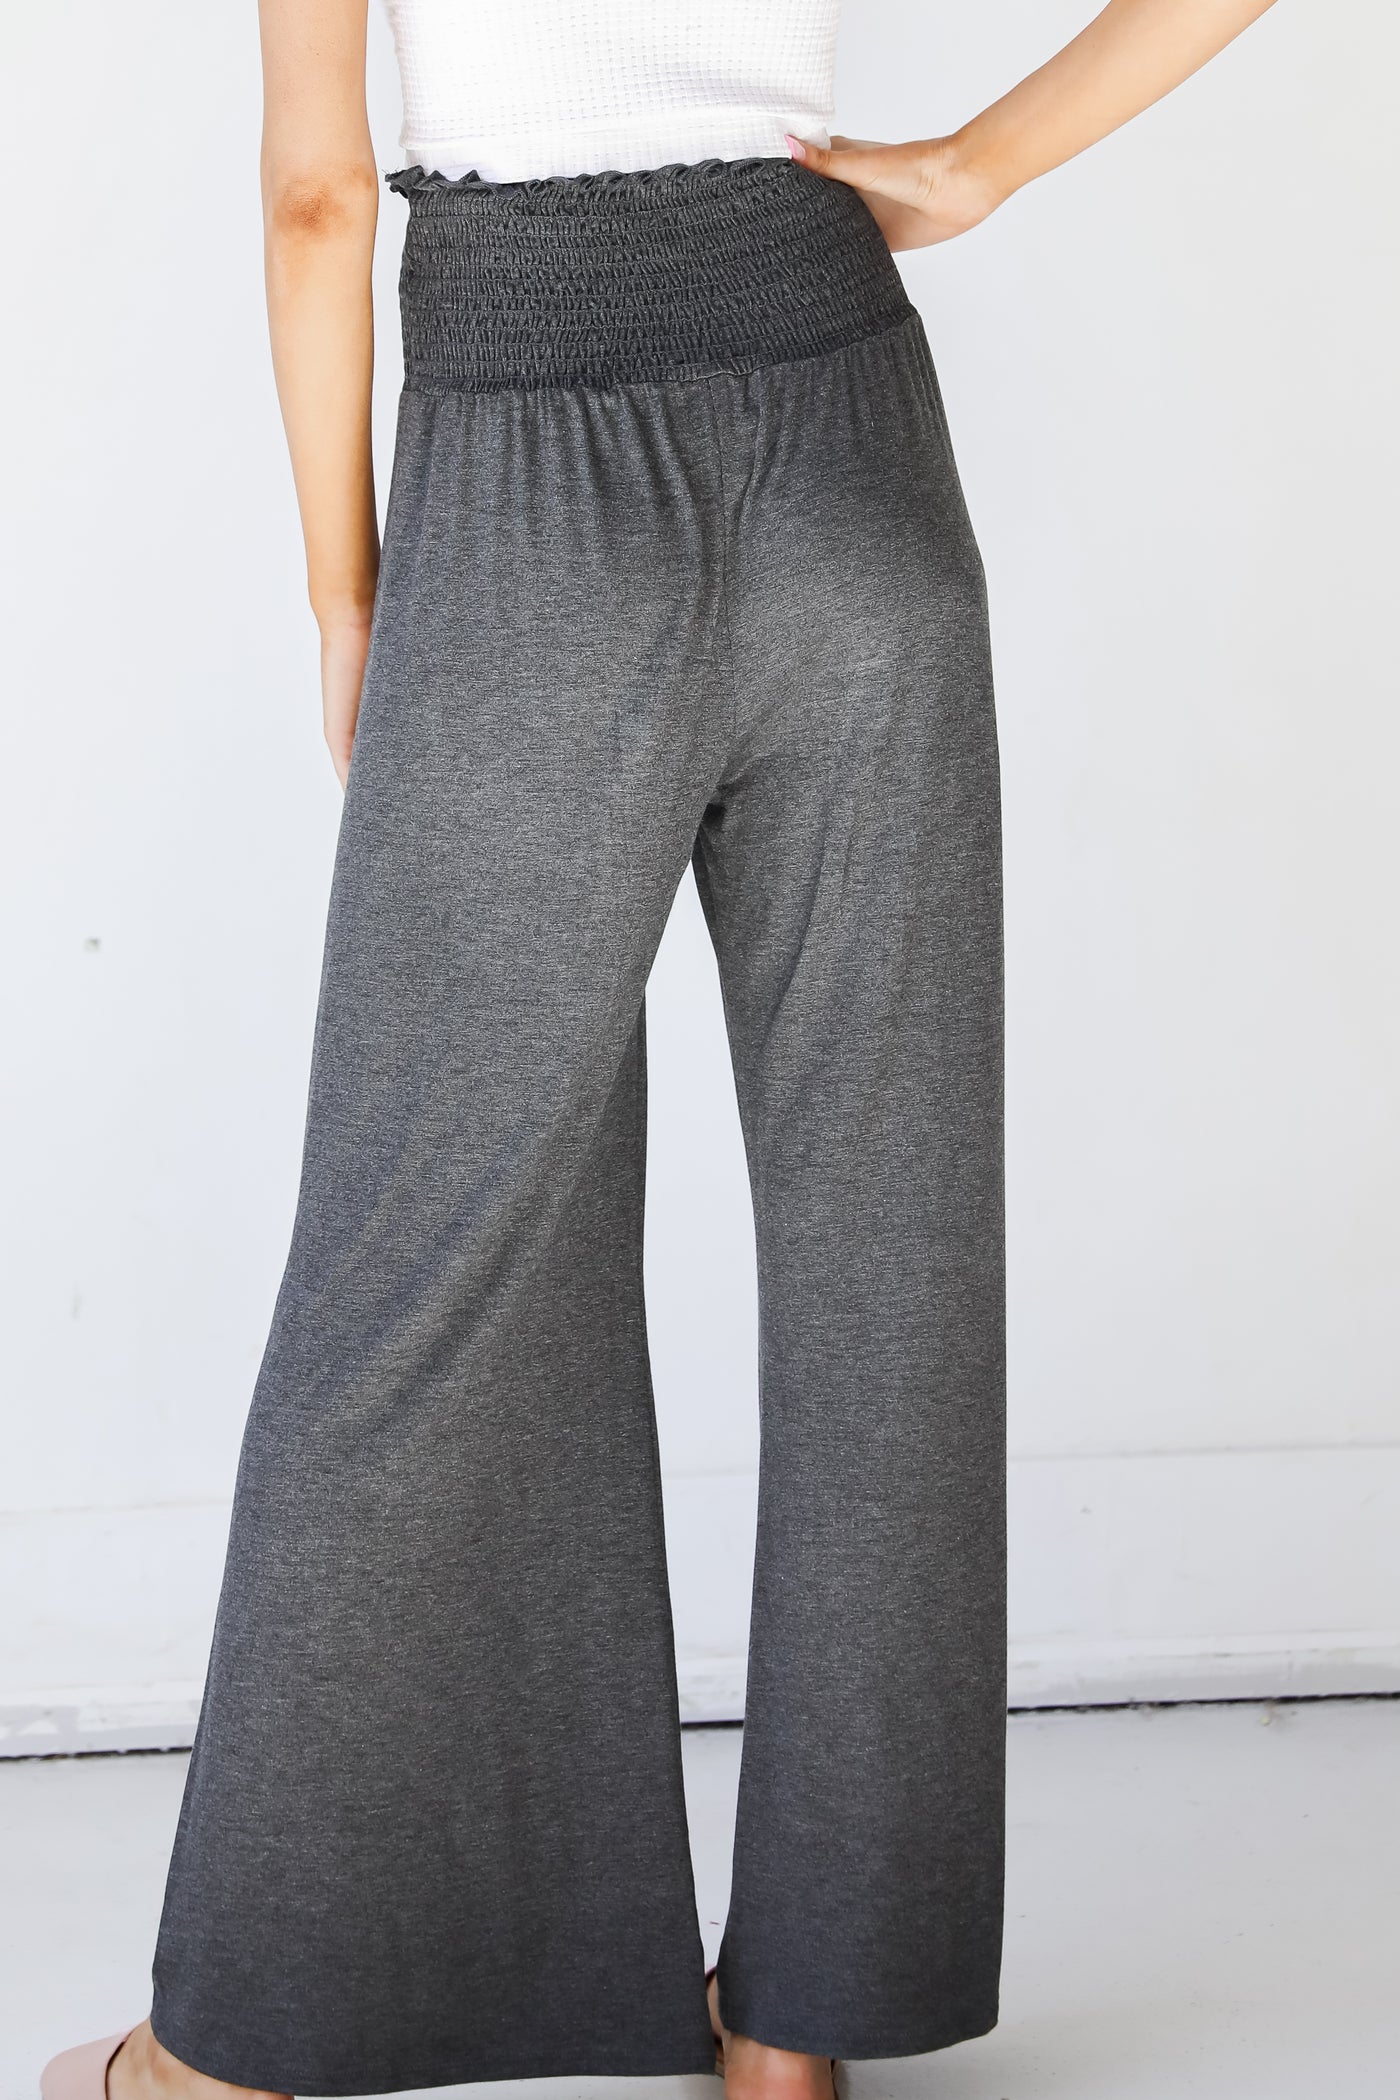 Smocked Wide Leg Pants in charcoal back view